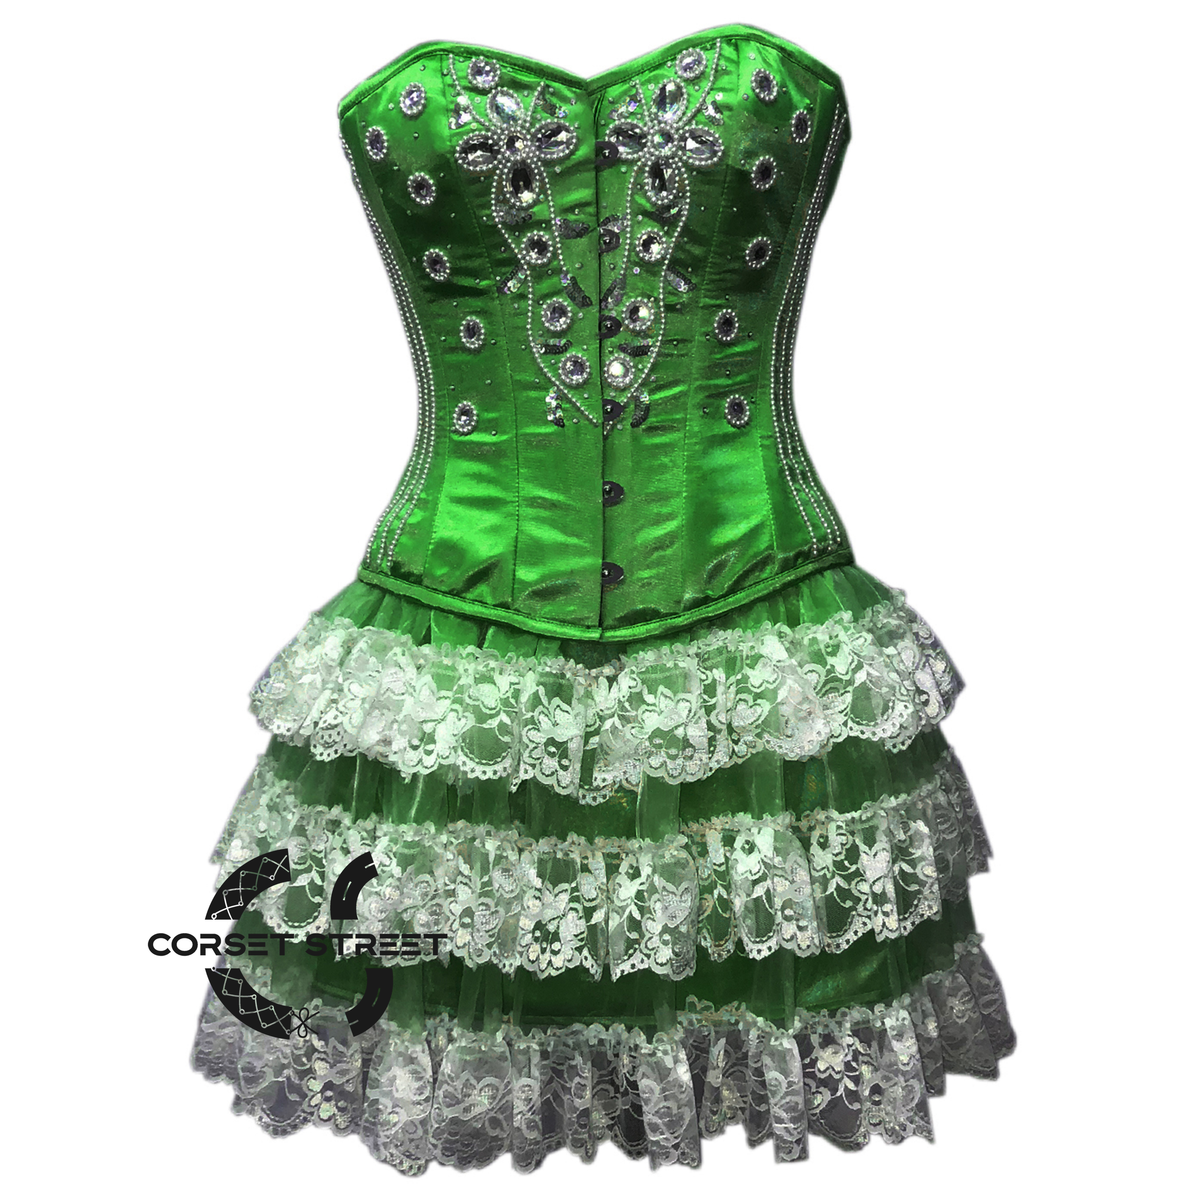 Plus Size Green Satin Silver Sequins Burlesque Dress With Net Frill Skirt Corset Gothic Overbust Costume